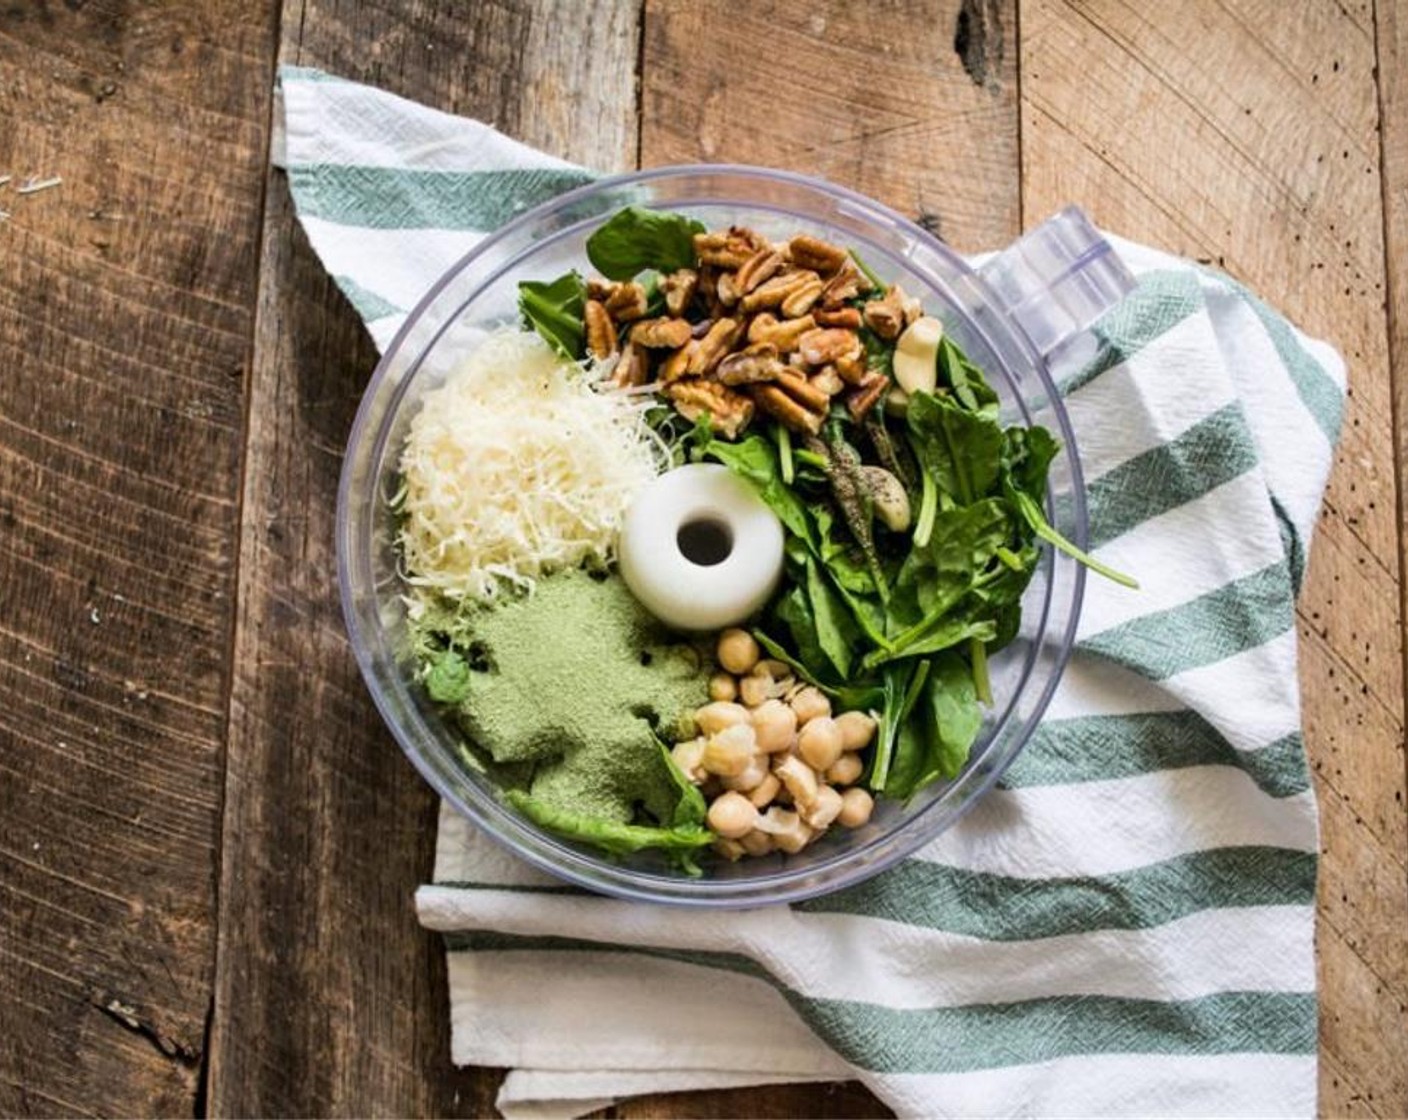 step 3 Add Fresh Spinach (2 cups), Pecans (1/4 cup), Collagen Beauty Greens (1 scoop), Parmesan Cheese (1/2 cup), Garlic (1 clove), juice from Lemon (1), Salt (1/2 tsp), Ground Black Pepper (1/4 tsp), Coconut Oil (1 Tbsp) and  Canned Chickpeas (1/4 cup) to the bowl of a food processor.